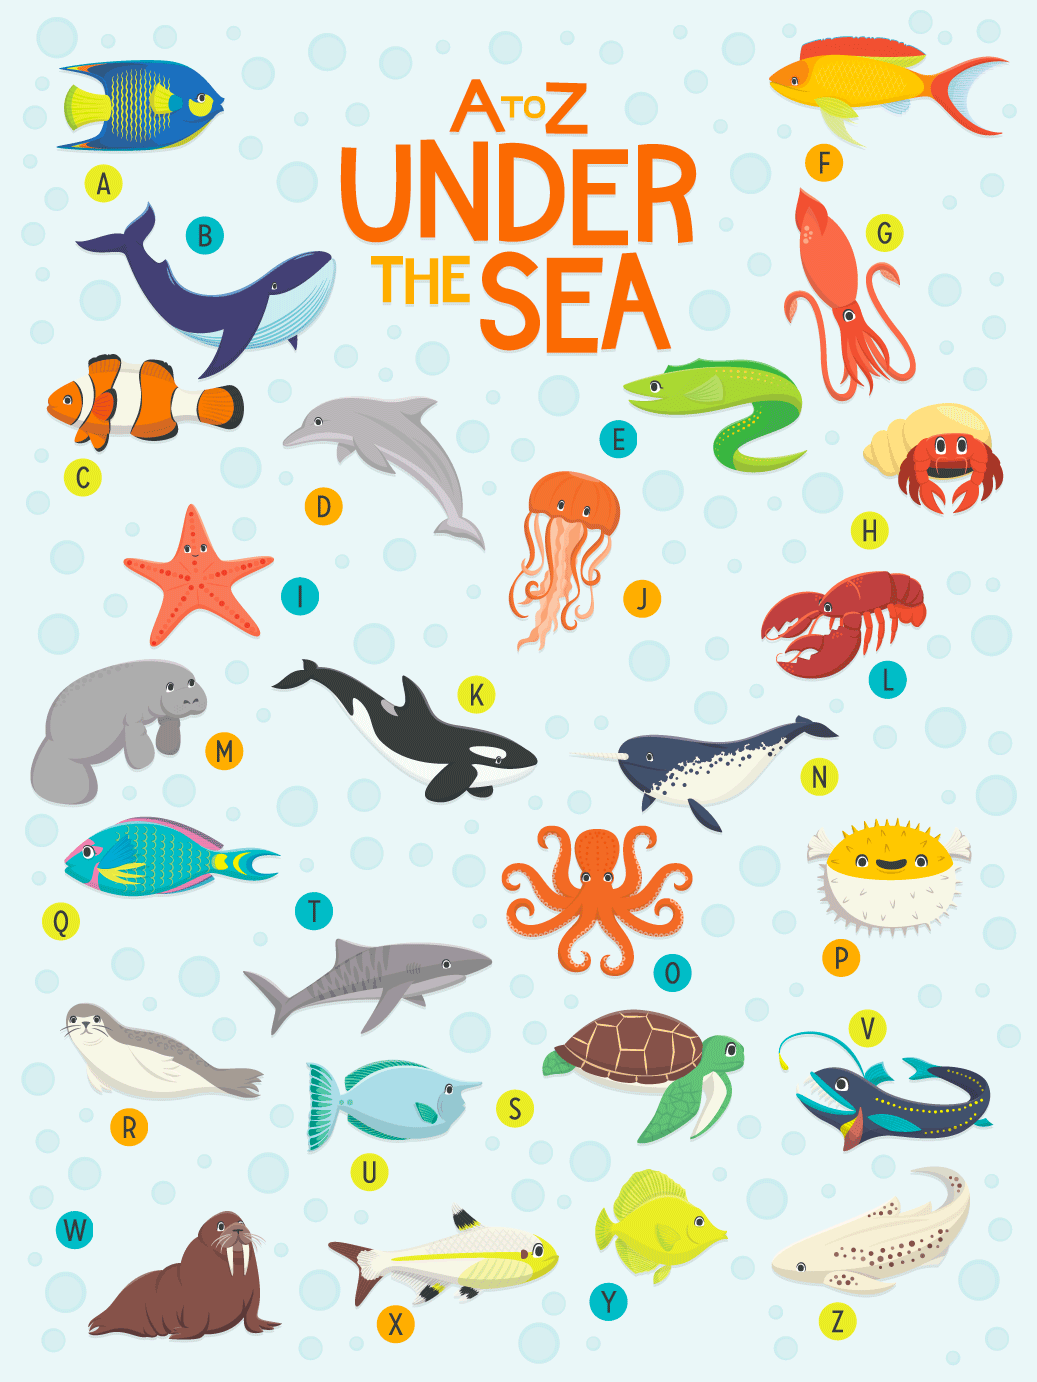 Can You Name These A-Z Sea Animals?